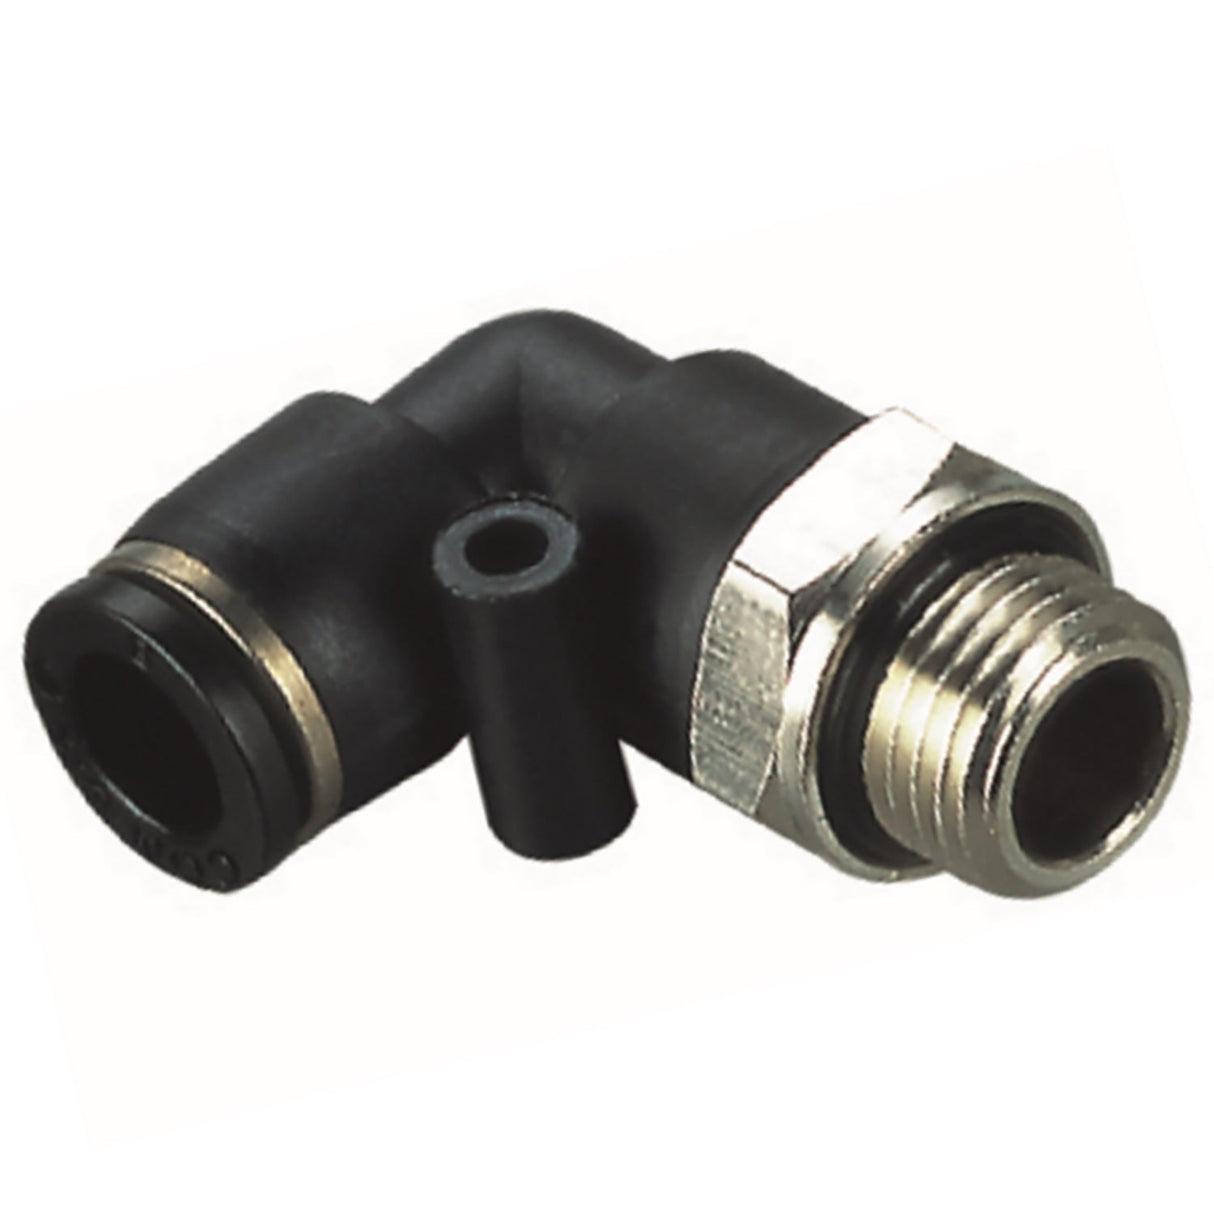 Threaded Coupling knee with O-ring 4x1/4"